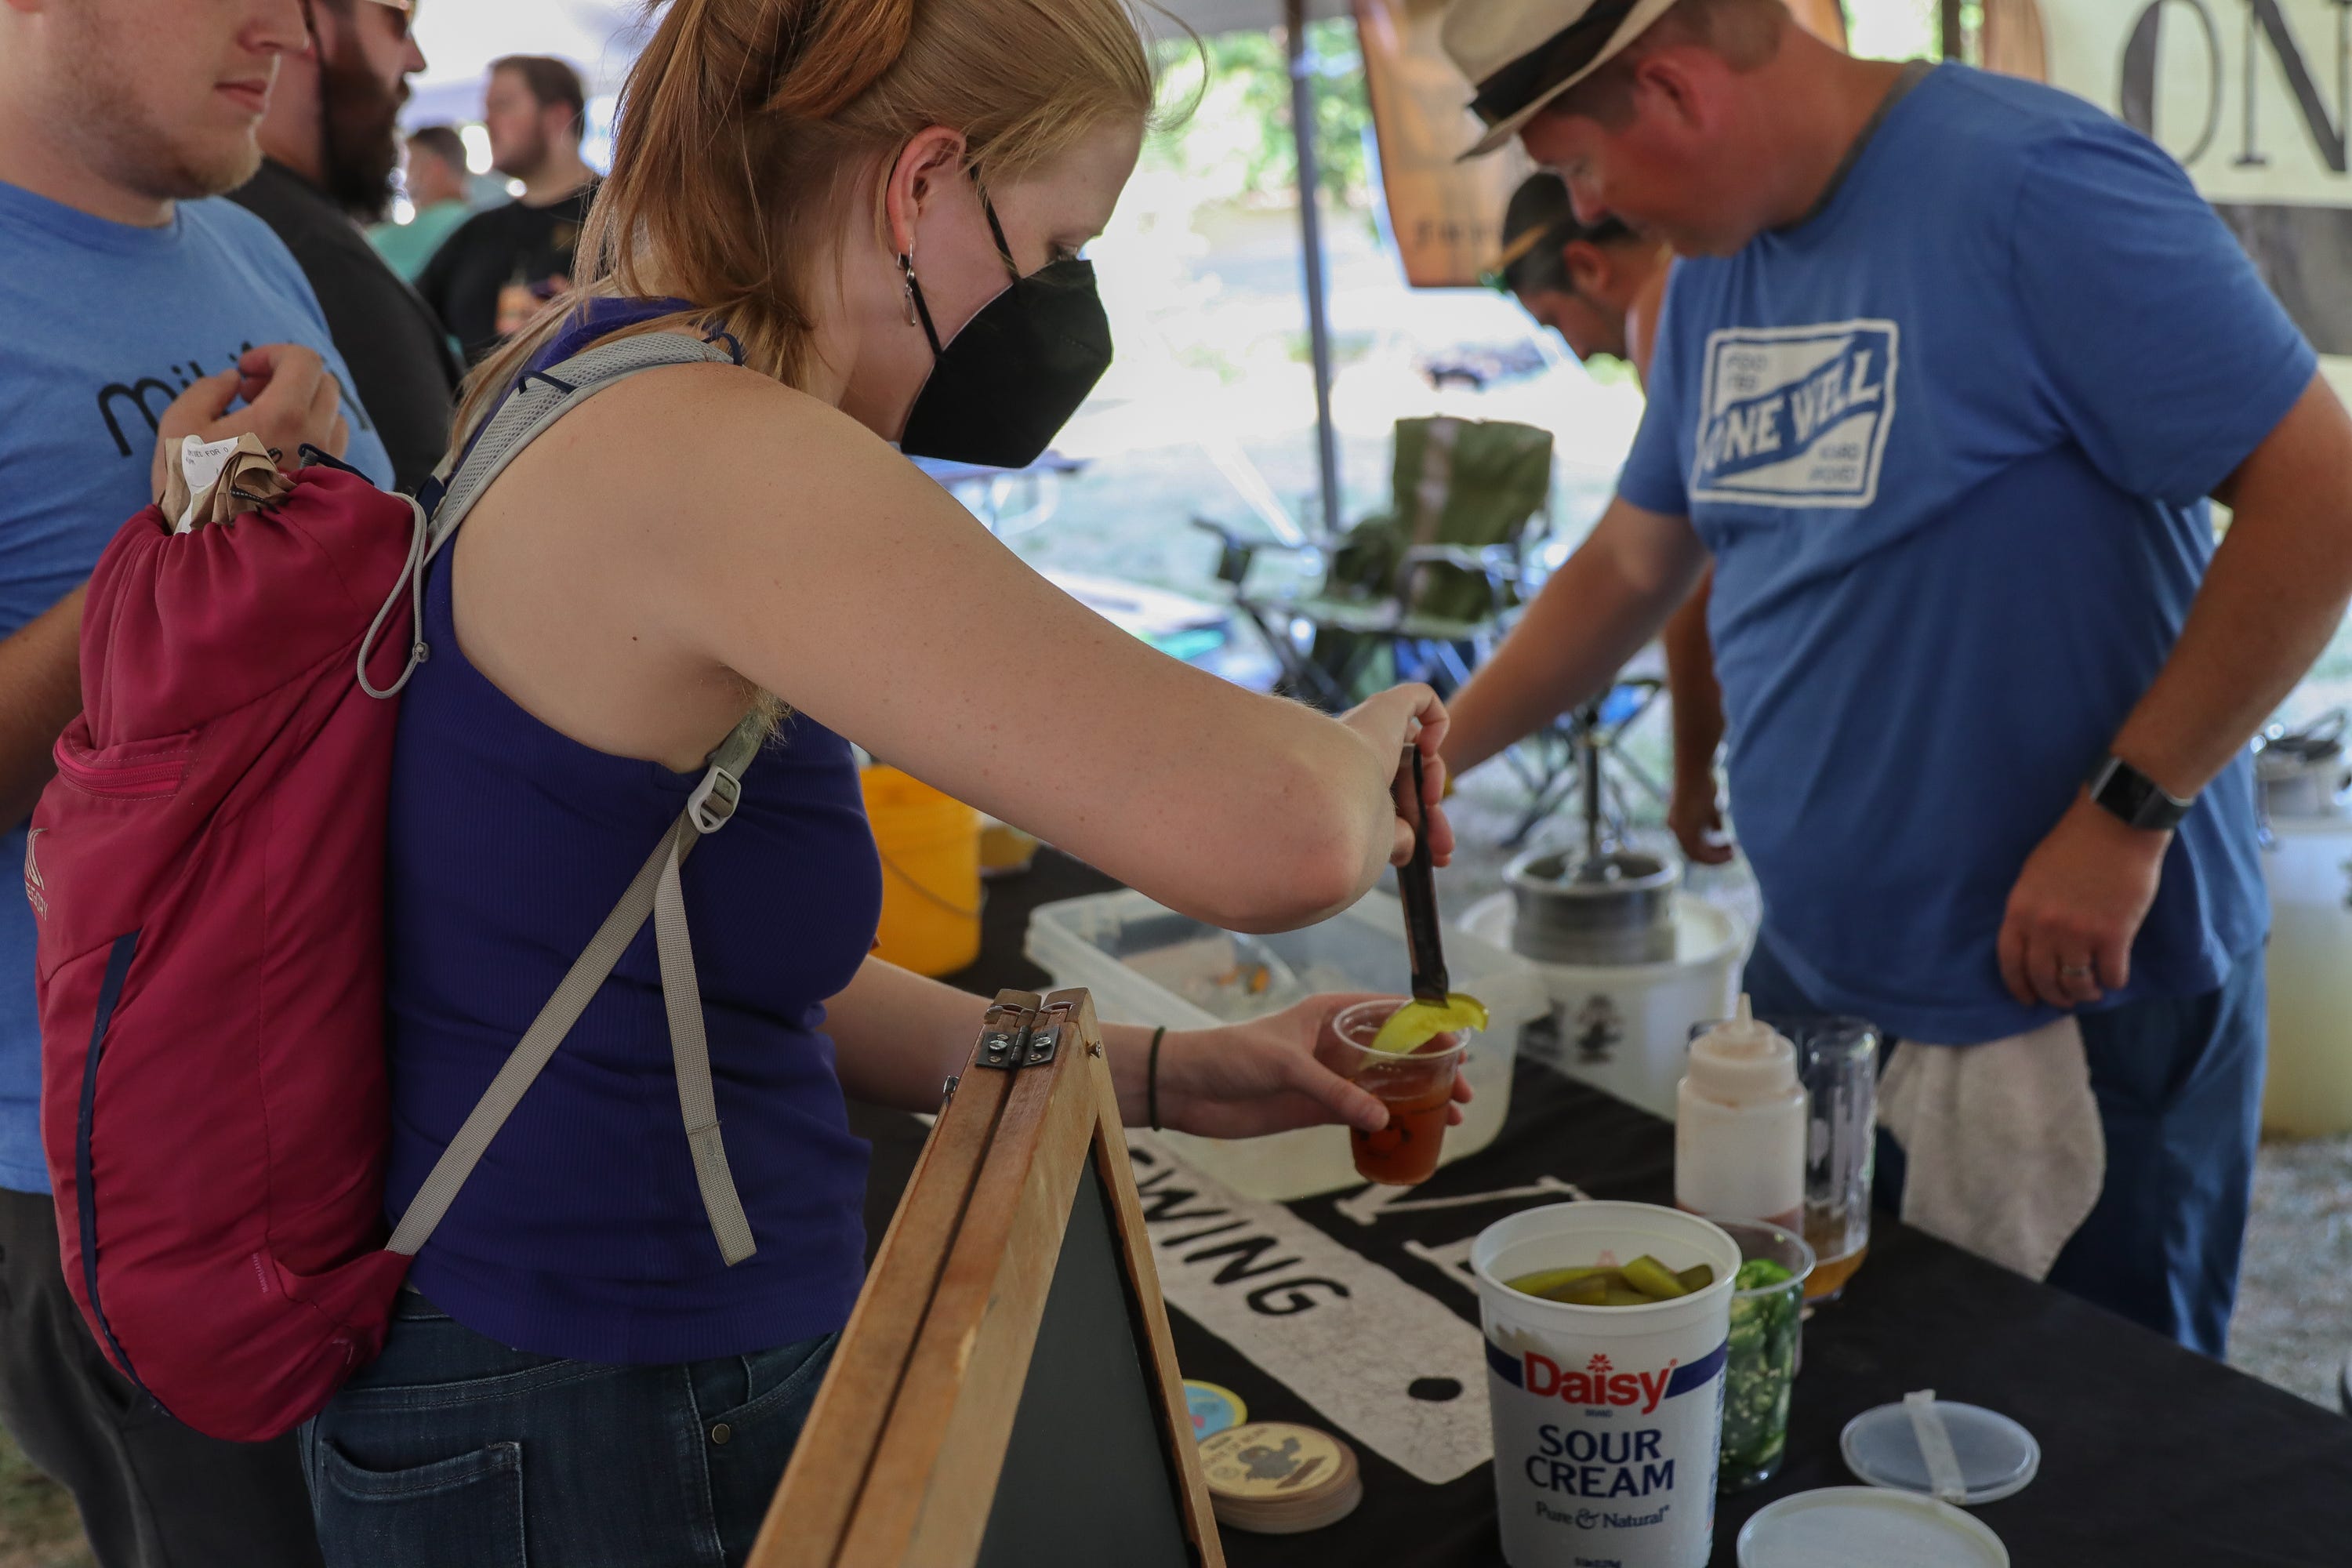 Anna Goren, of Ypsilanti, puts a pickle into her "bloody" Xalapa Blonde Ale from Kalamazoo's One Well Brewing. The drink blends a peppery, but not hot, jalapeno ale with bloody mary mix and fixings for a different take on a beer.